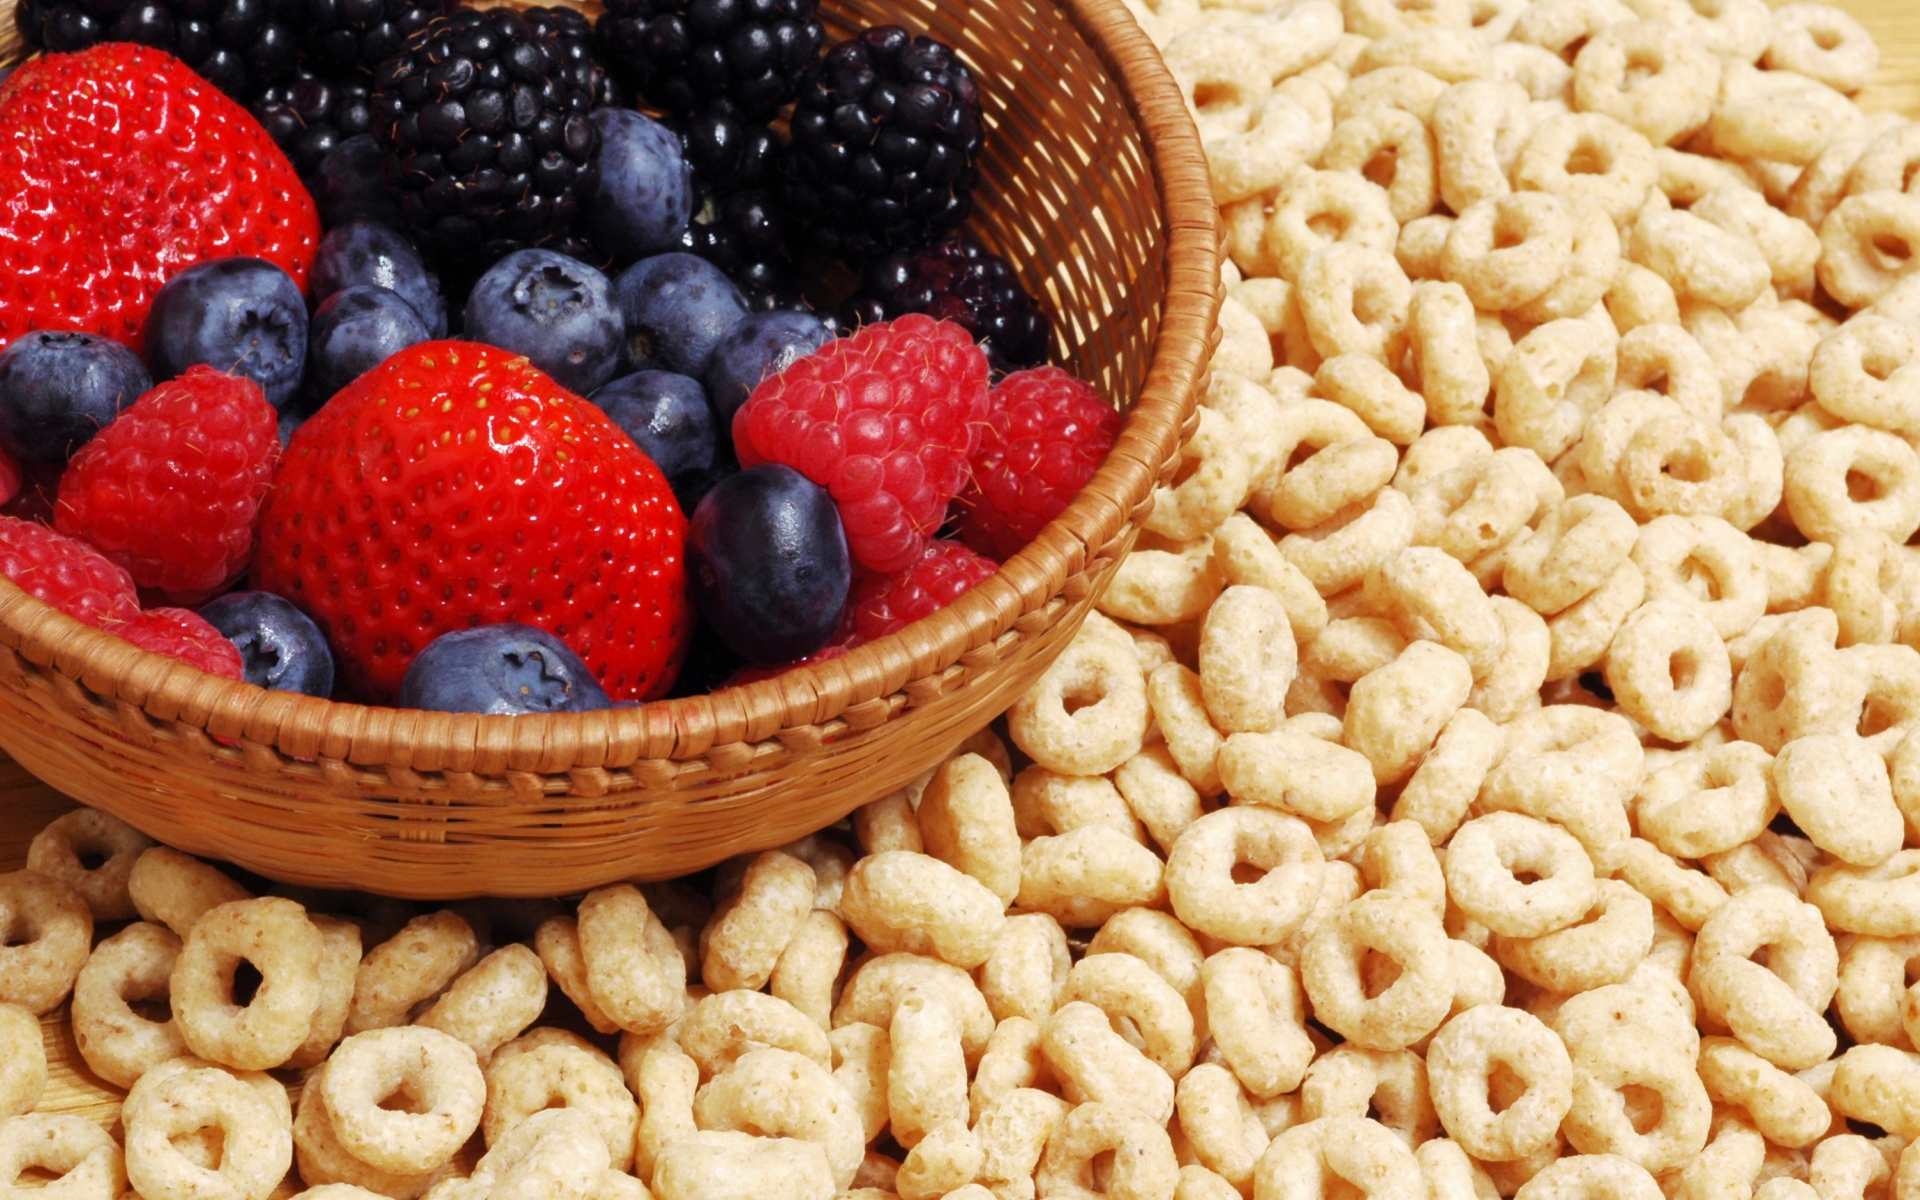 Strawberry Blueberry Cereal Basket 1920x1200